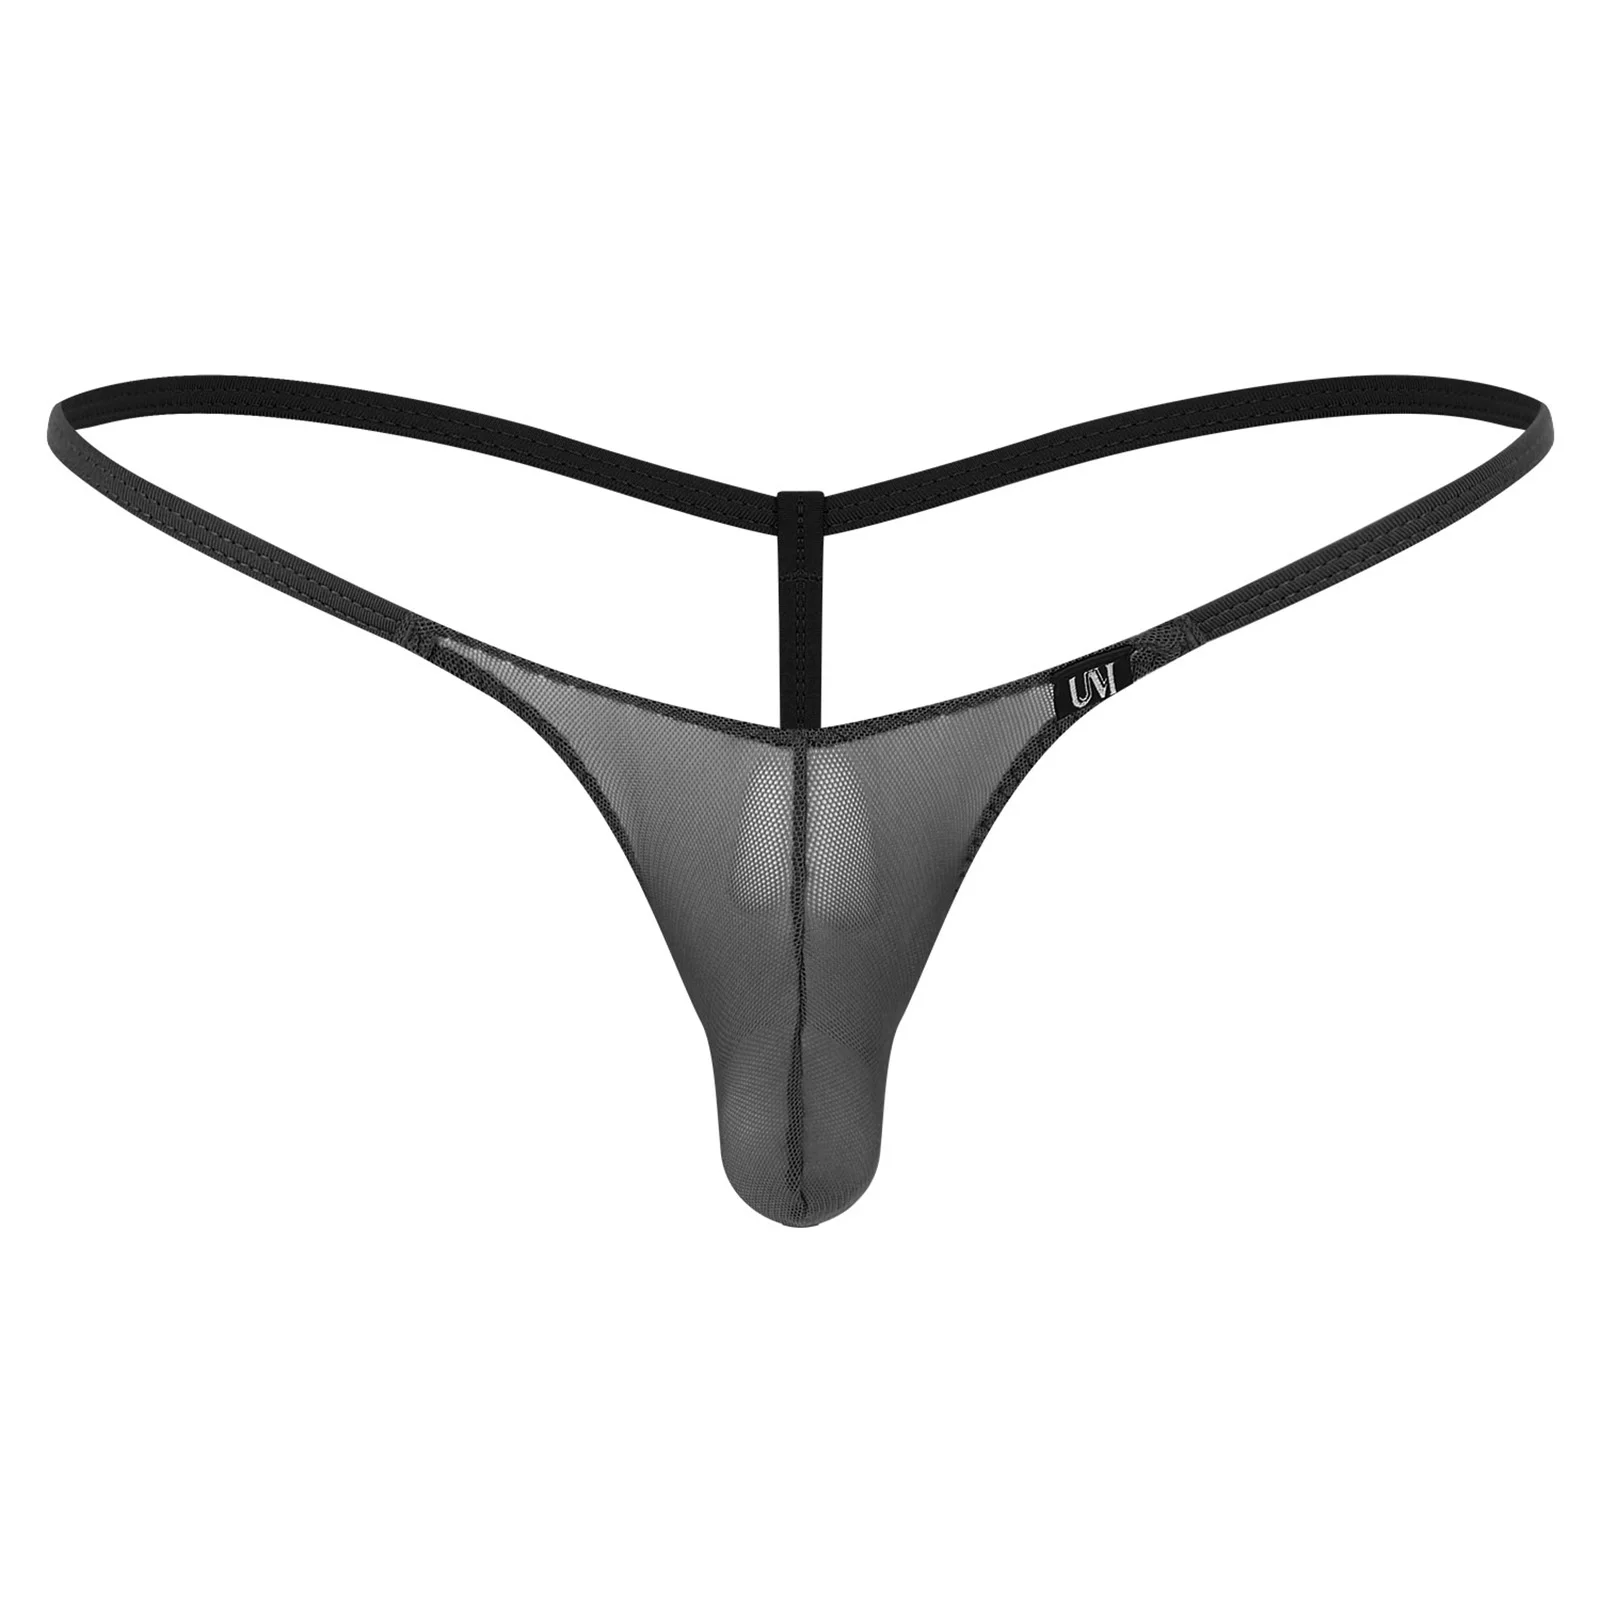 

Men Underwear Thongs See Through Male Sexy Transparent Bulge Pouch Thong Sheer Panties Low Waist Mesh Gay G-string Underpants